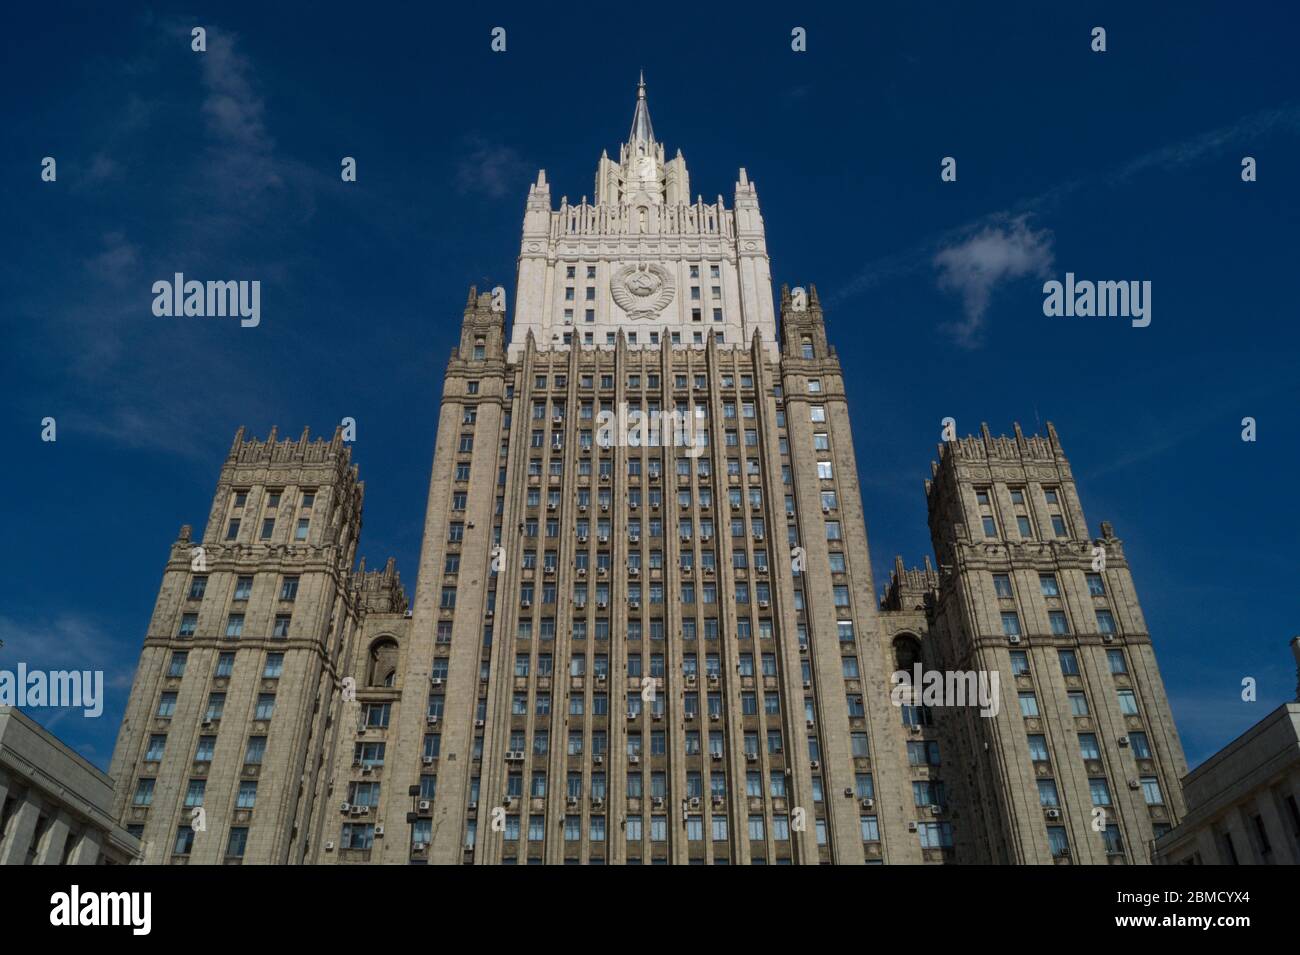 Central office of the Russian Ministry of Foreign Affairs in Moscow. Photographed from low angle against blue sky with white clouds. Stock Photo